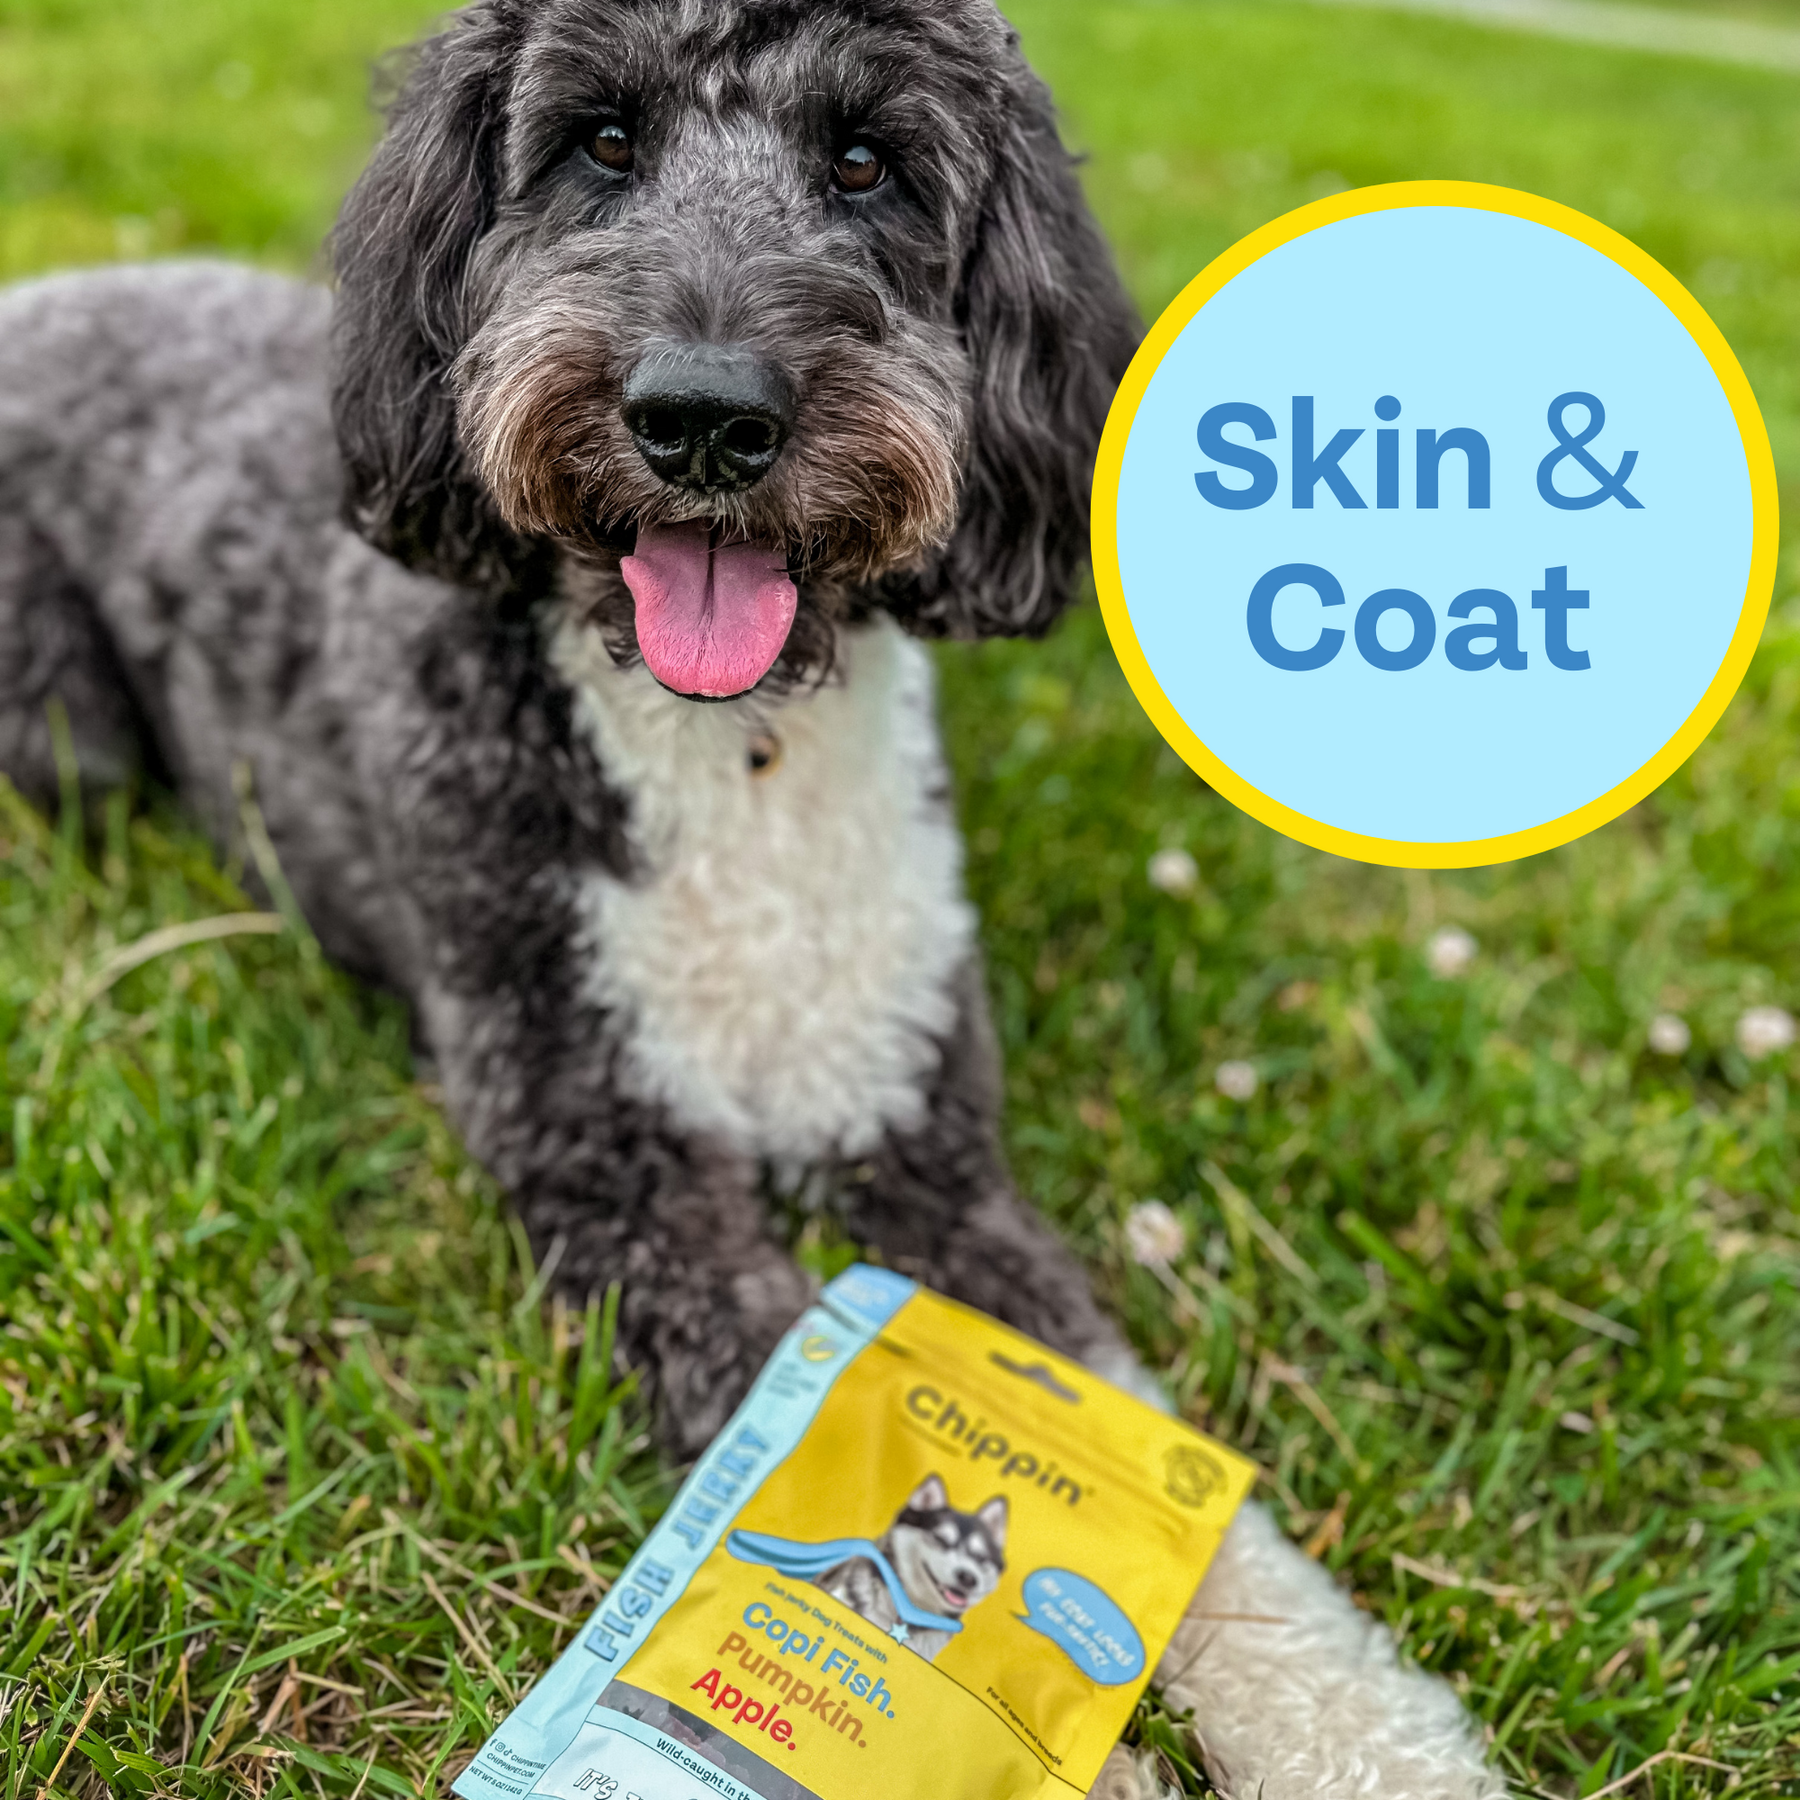 Doogle laying on the lawn and it says skin and coat.